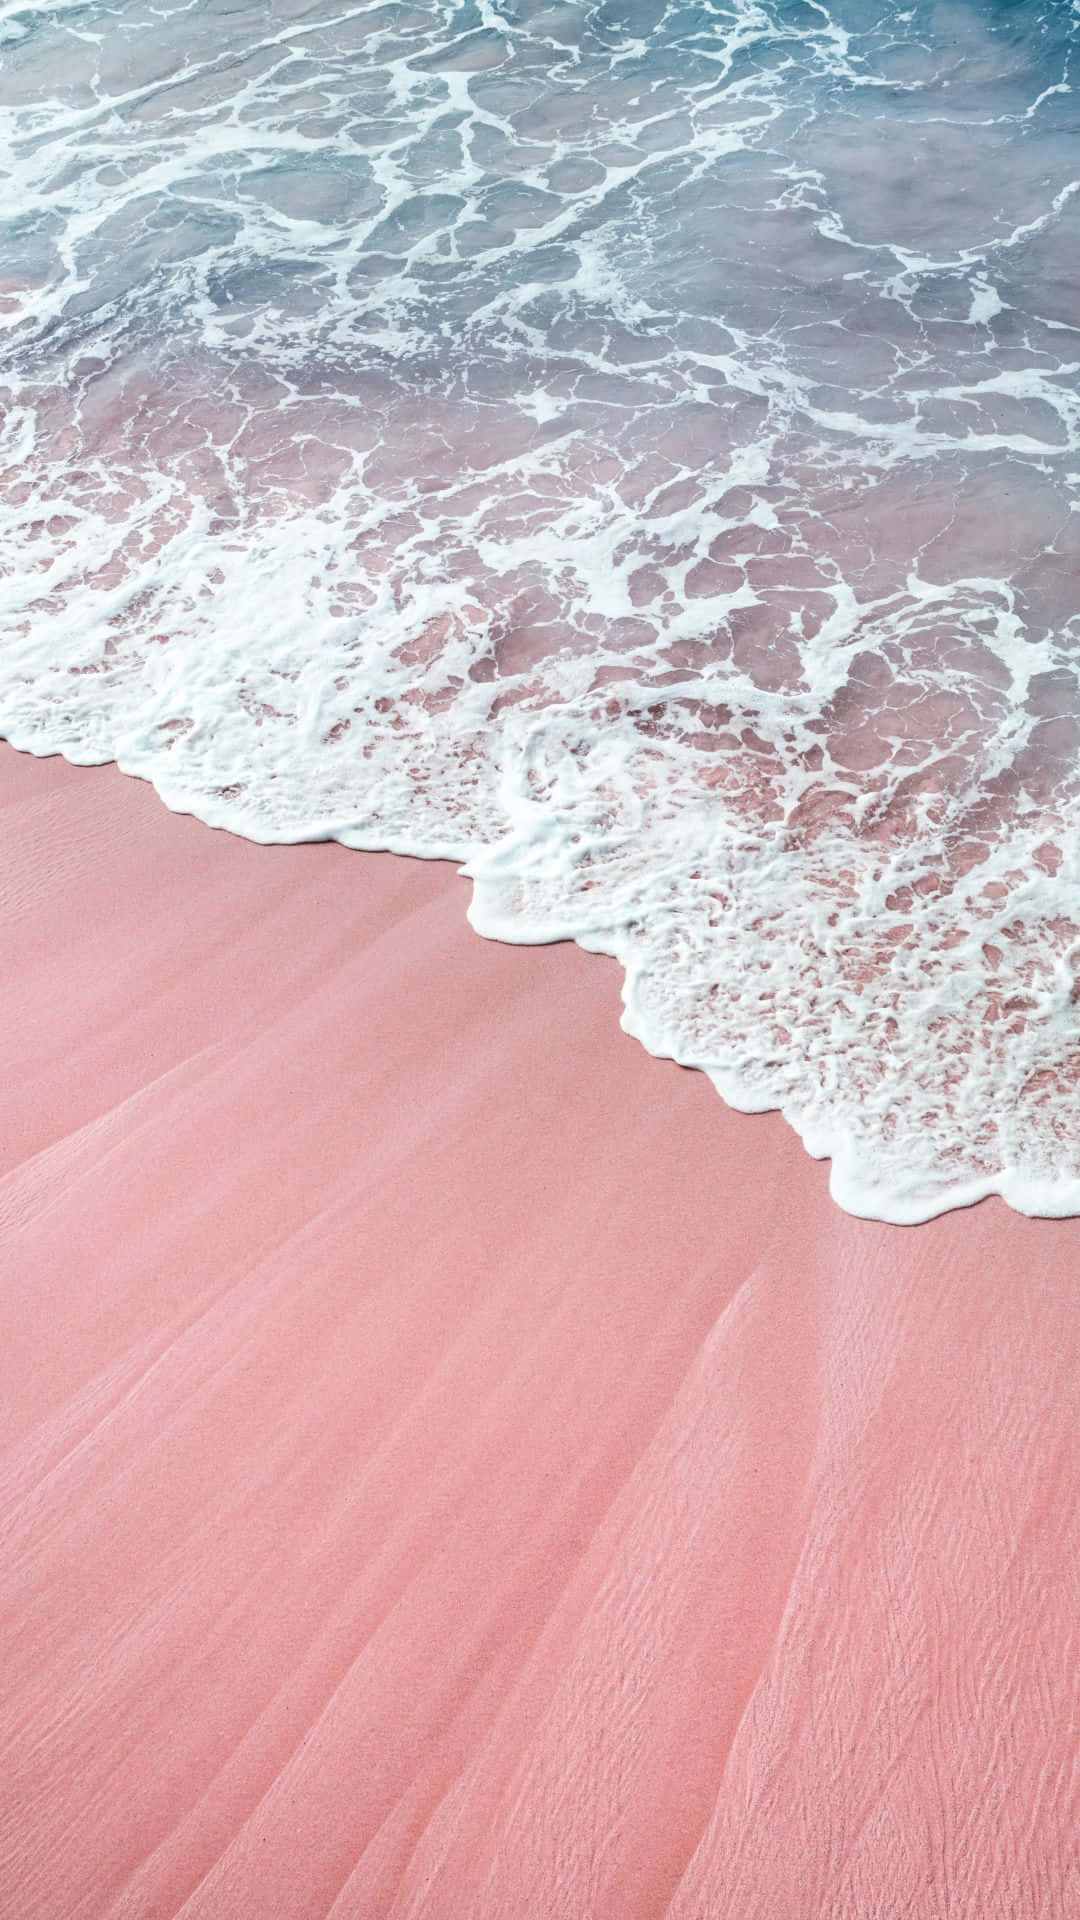 A pink sand beach with a white wave coming in. - Sand